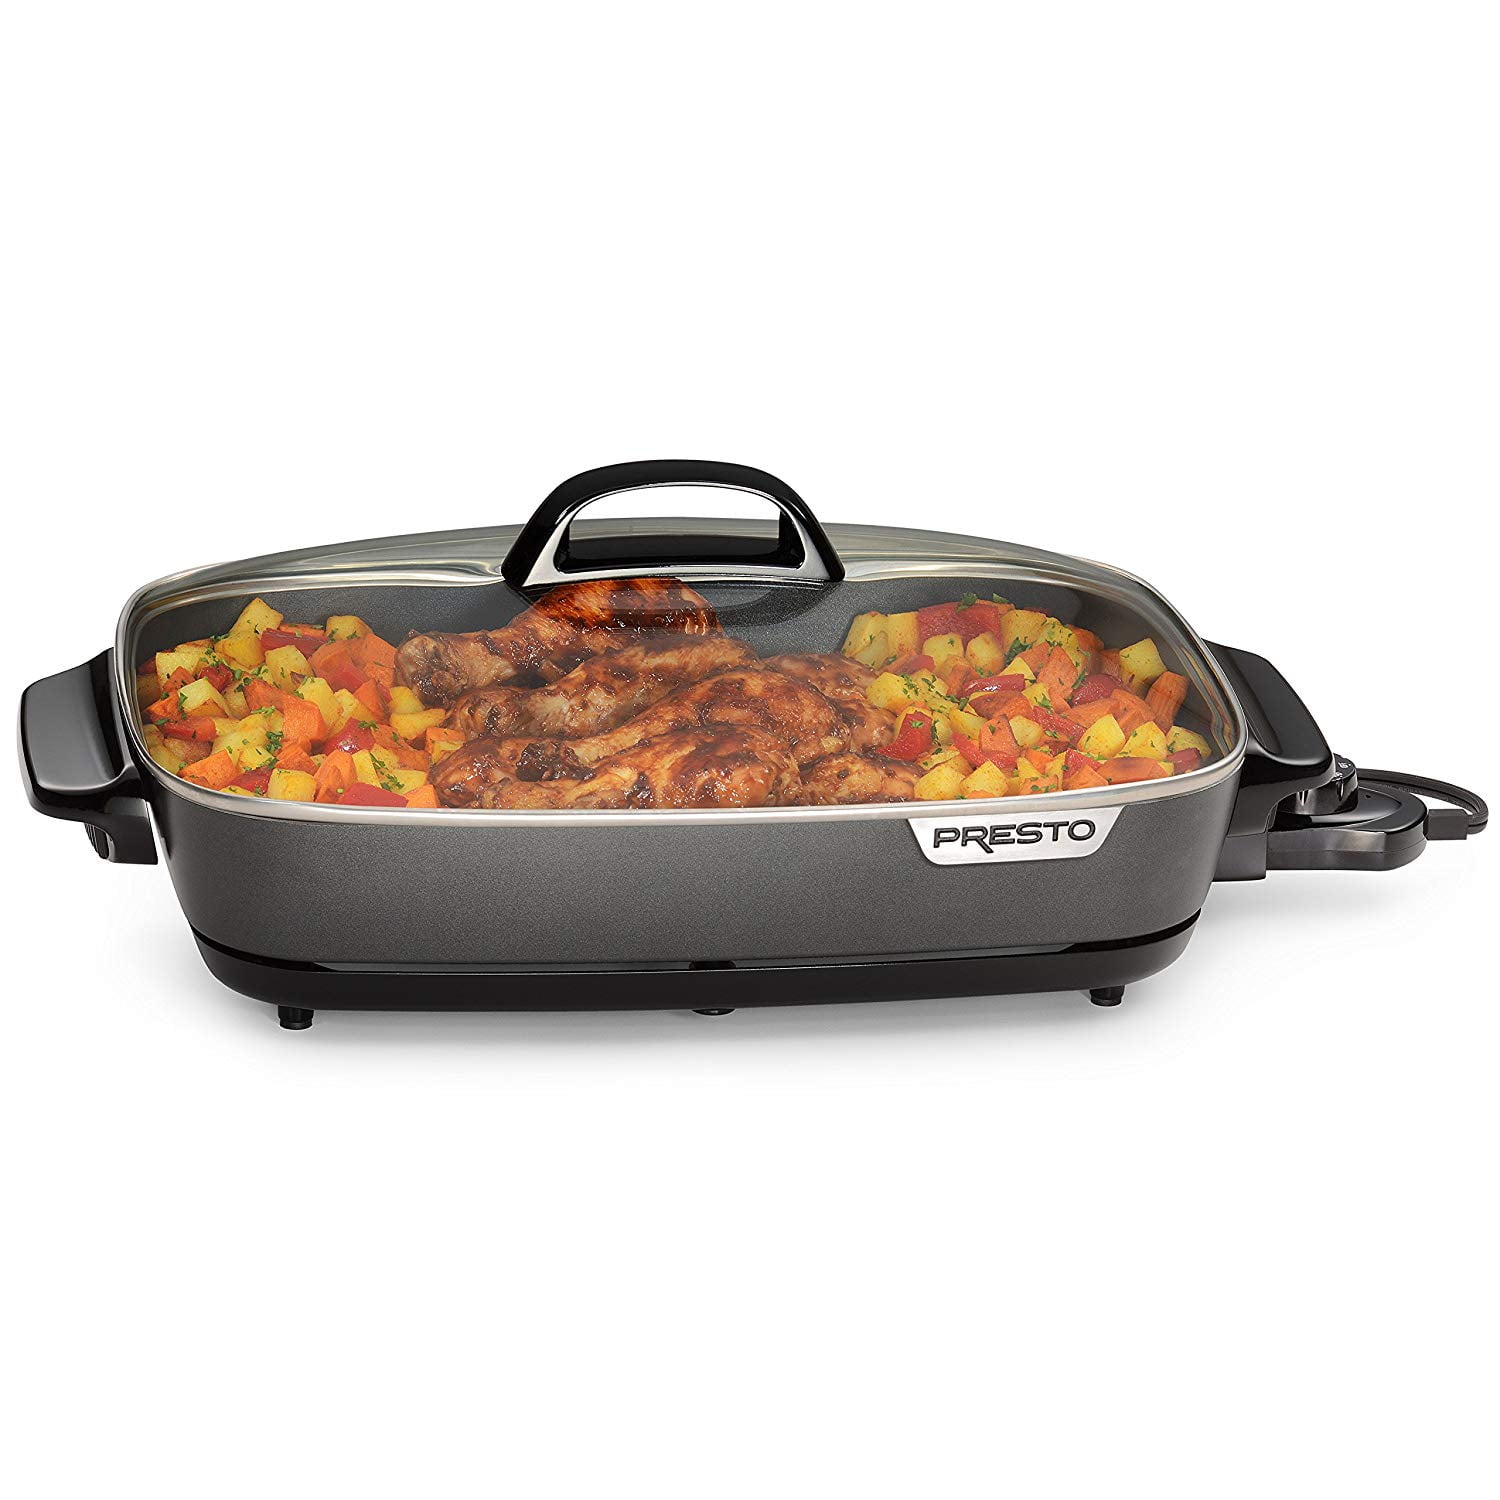 Presto 11 Electric Skillet with Glass Cover - 8907968